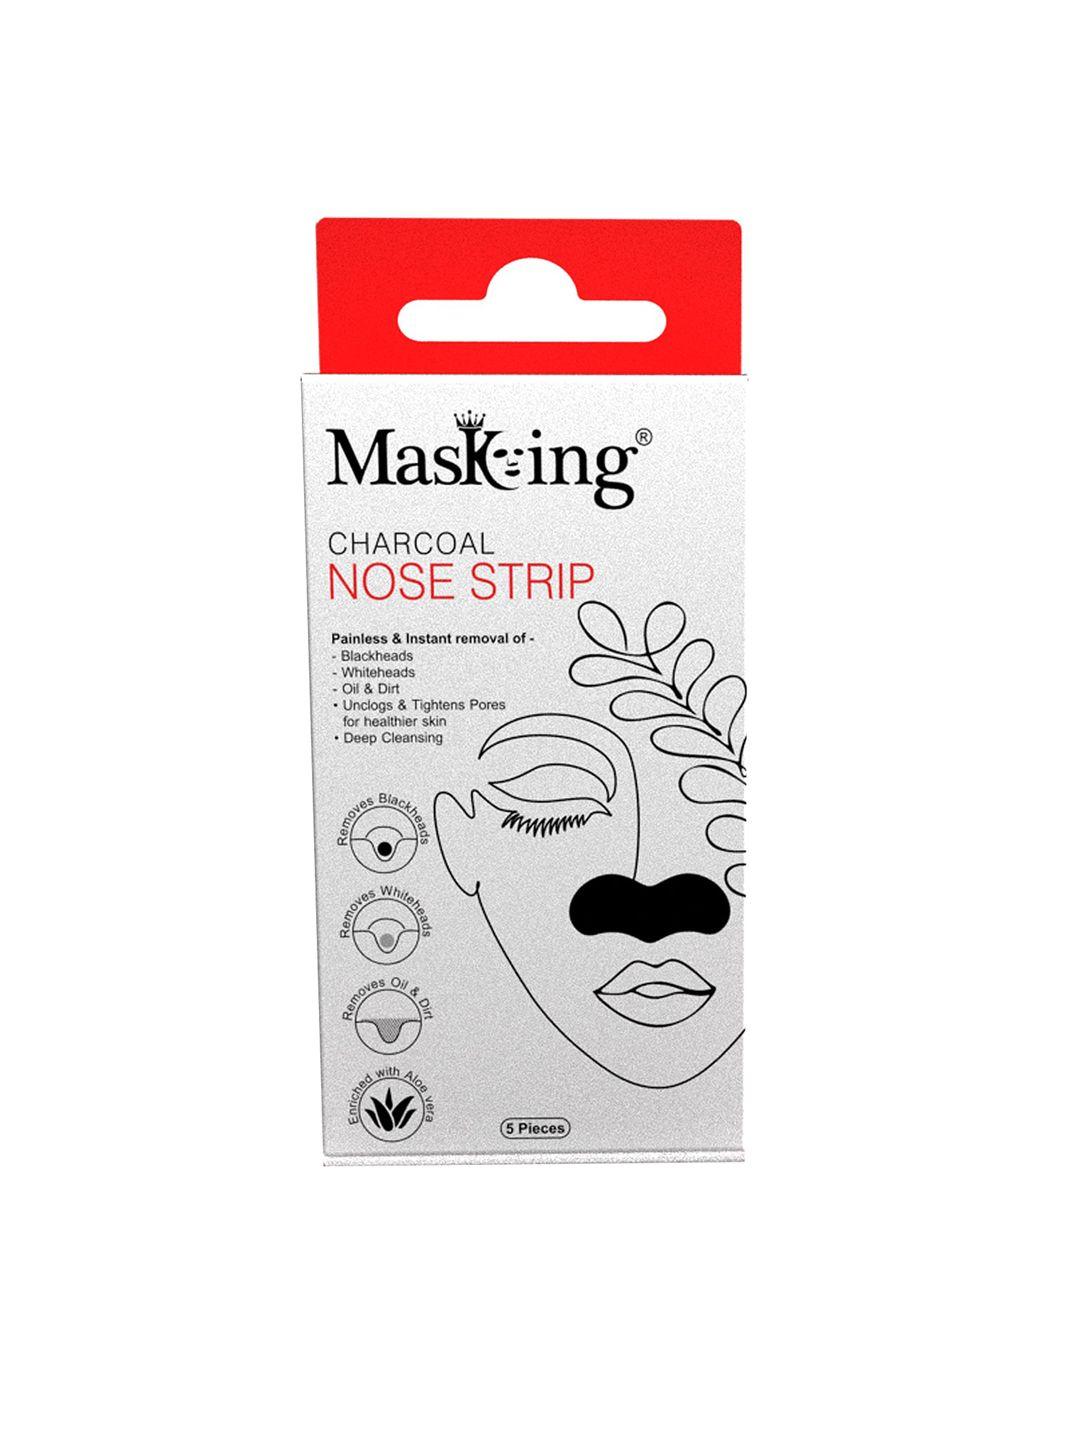 masking 5 charcoal nose stripes for blackheads removal